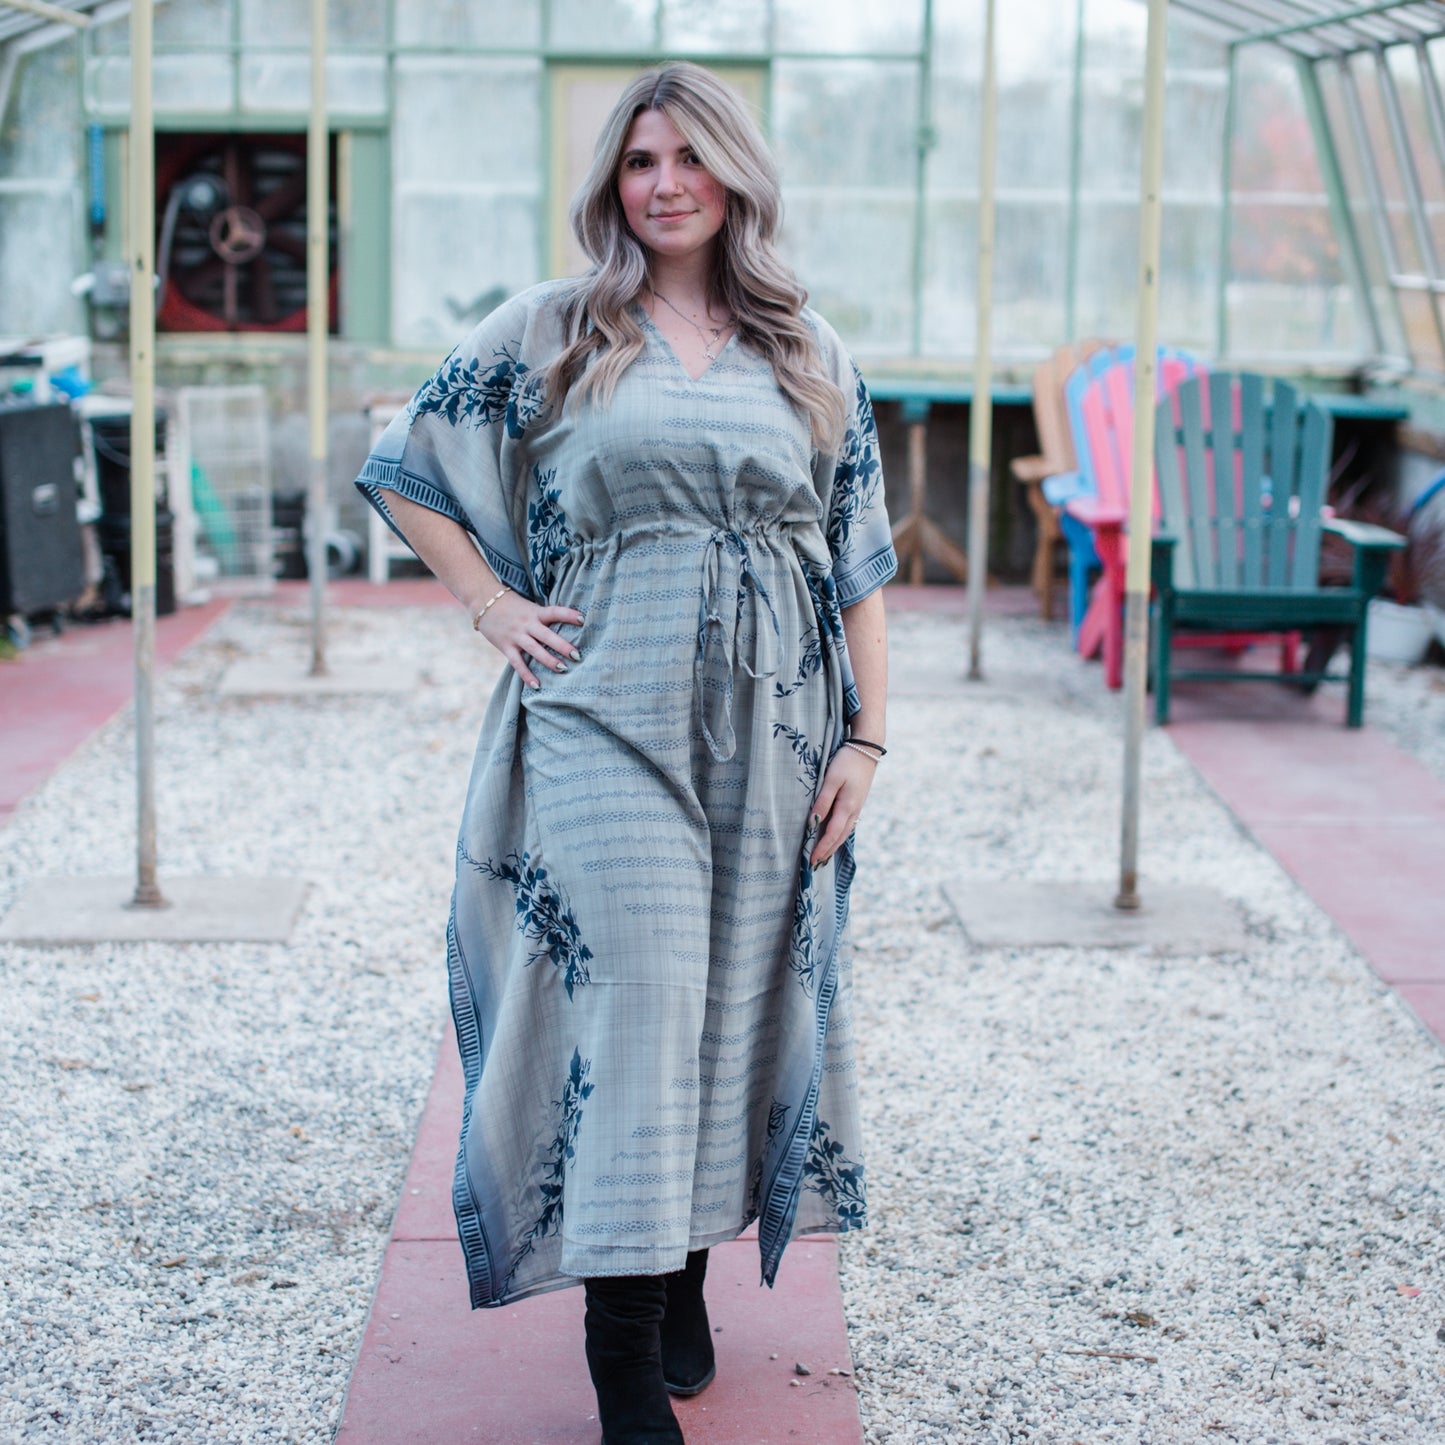 A blonde model with her hand on her hip. She's wearing a Grey Reclaimed Sari Long Kaftan with floral patterns and black boots.